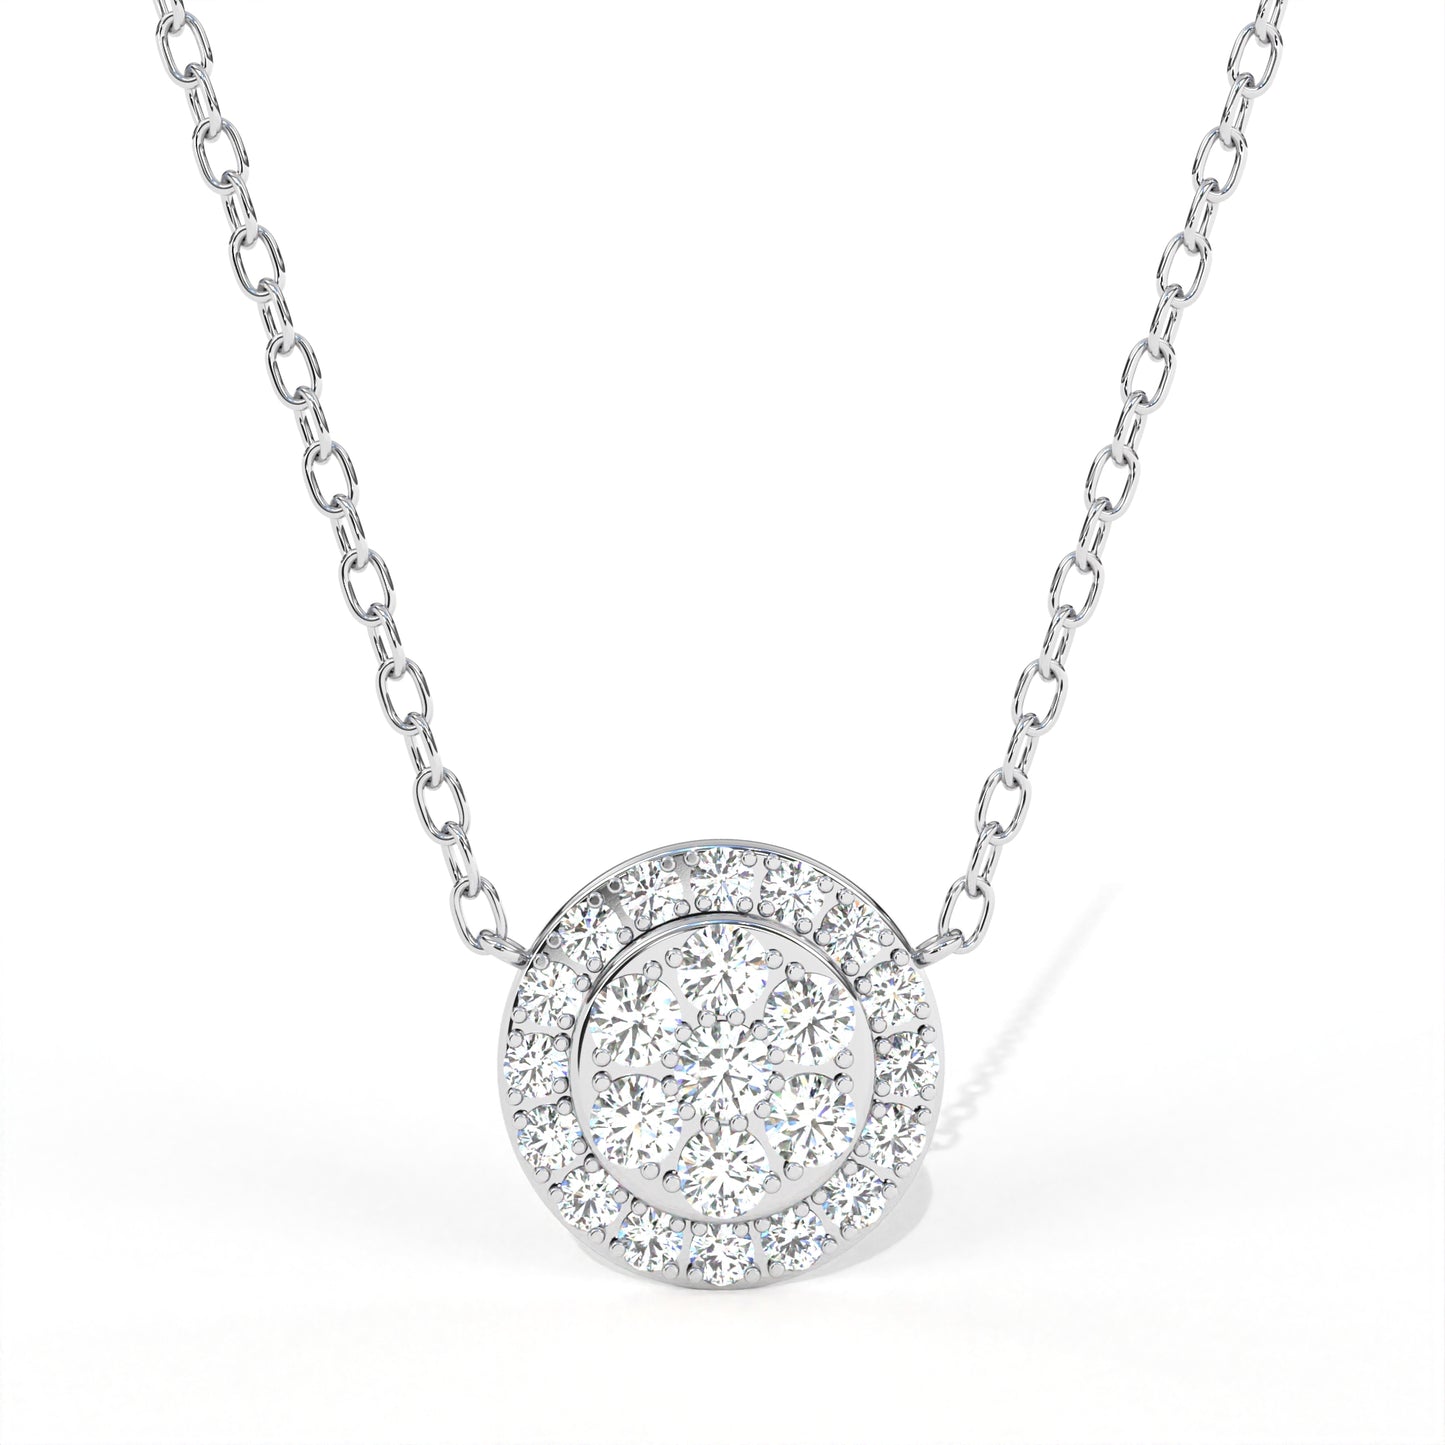 Constellation Necklace White Gold